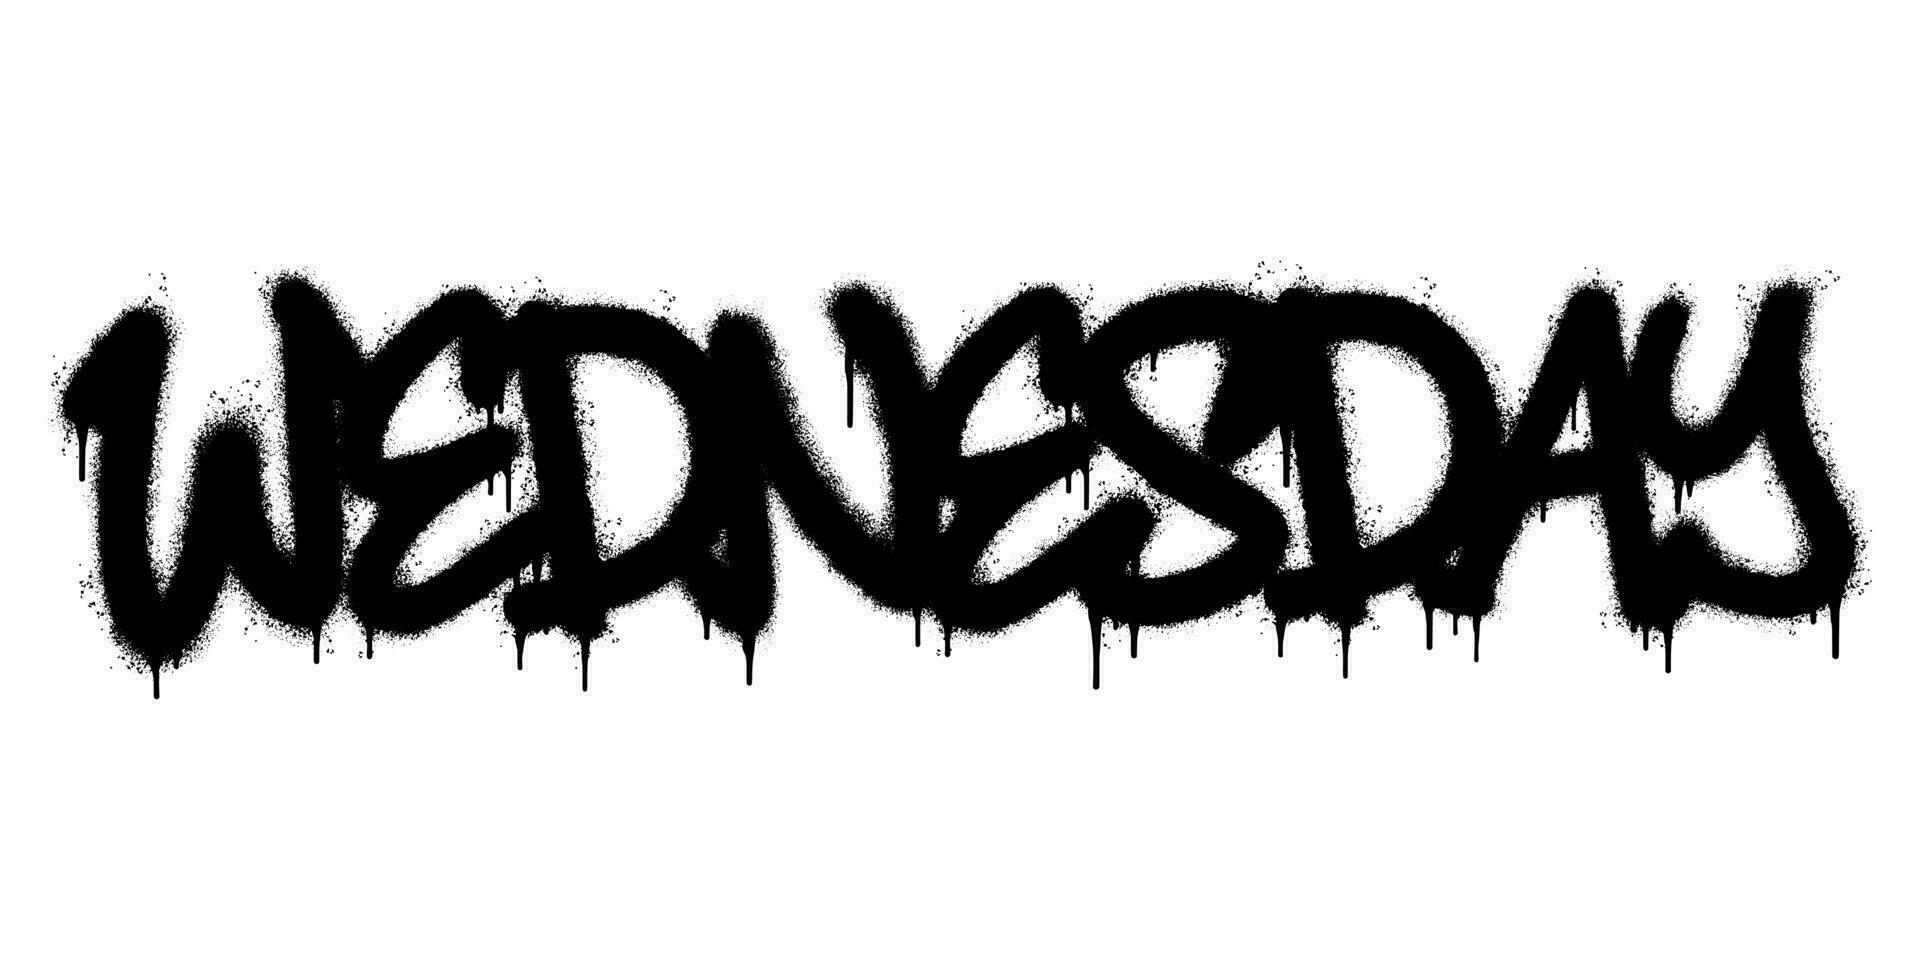 Spray Painted Graffiti Wednesday Word Sprayed isolated with a white background. graffiti font Wednesday with over spray in black over white. vector